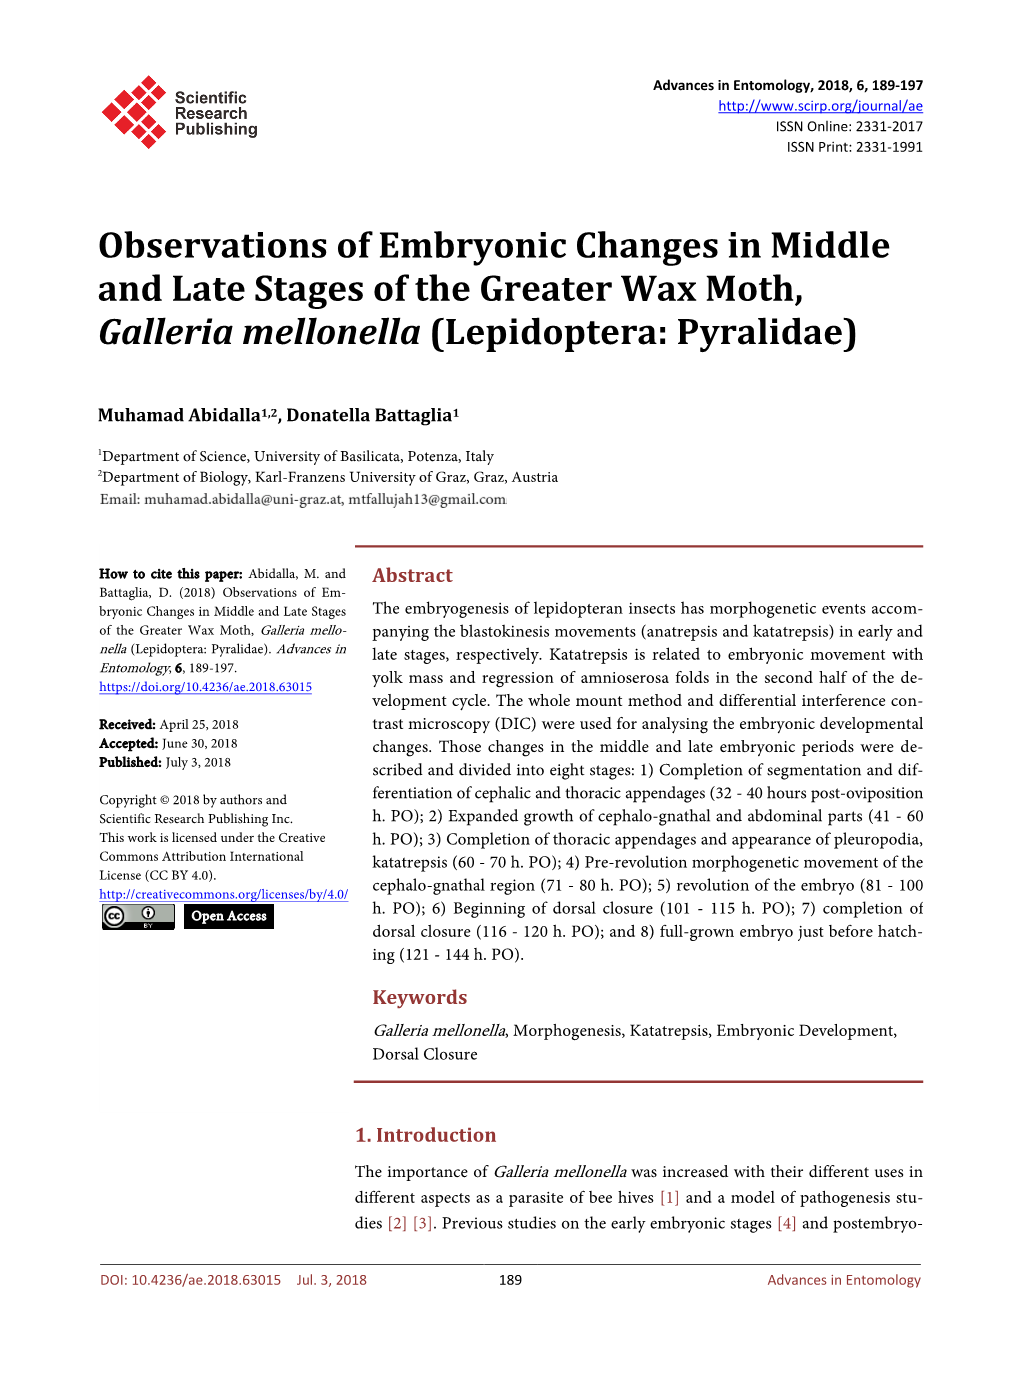 Observations of Embryonic Changes in Middle and Late Stages of the Greater Wax Moth, Galleria Mellonella (Lepidoptera: Pyralidae)